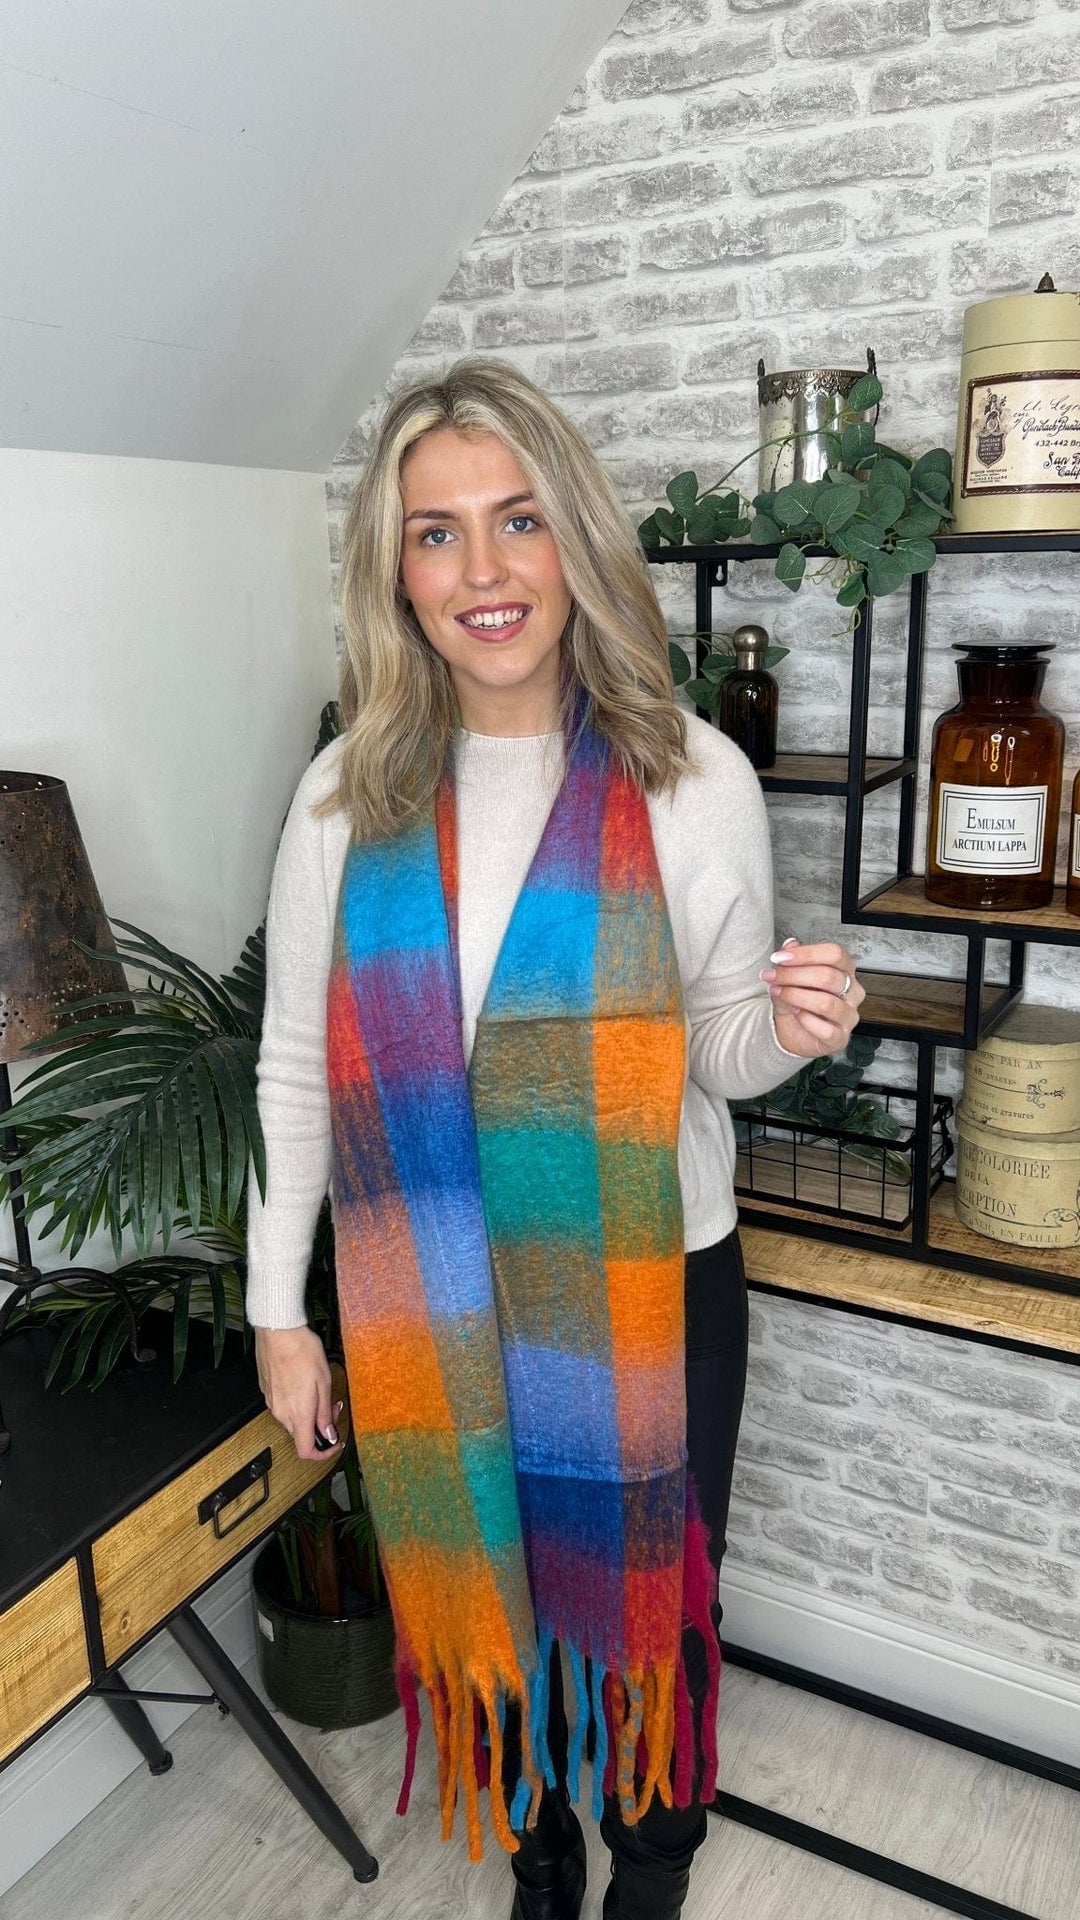 Emily Chunky Scarf In Orange Mix - Crabtree Cottage